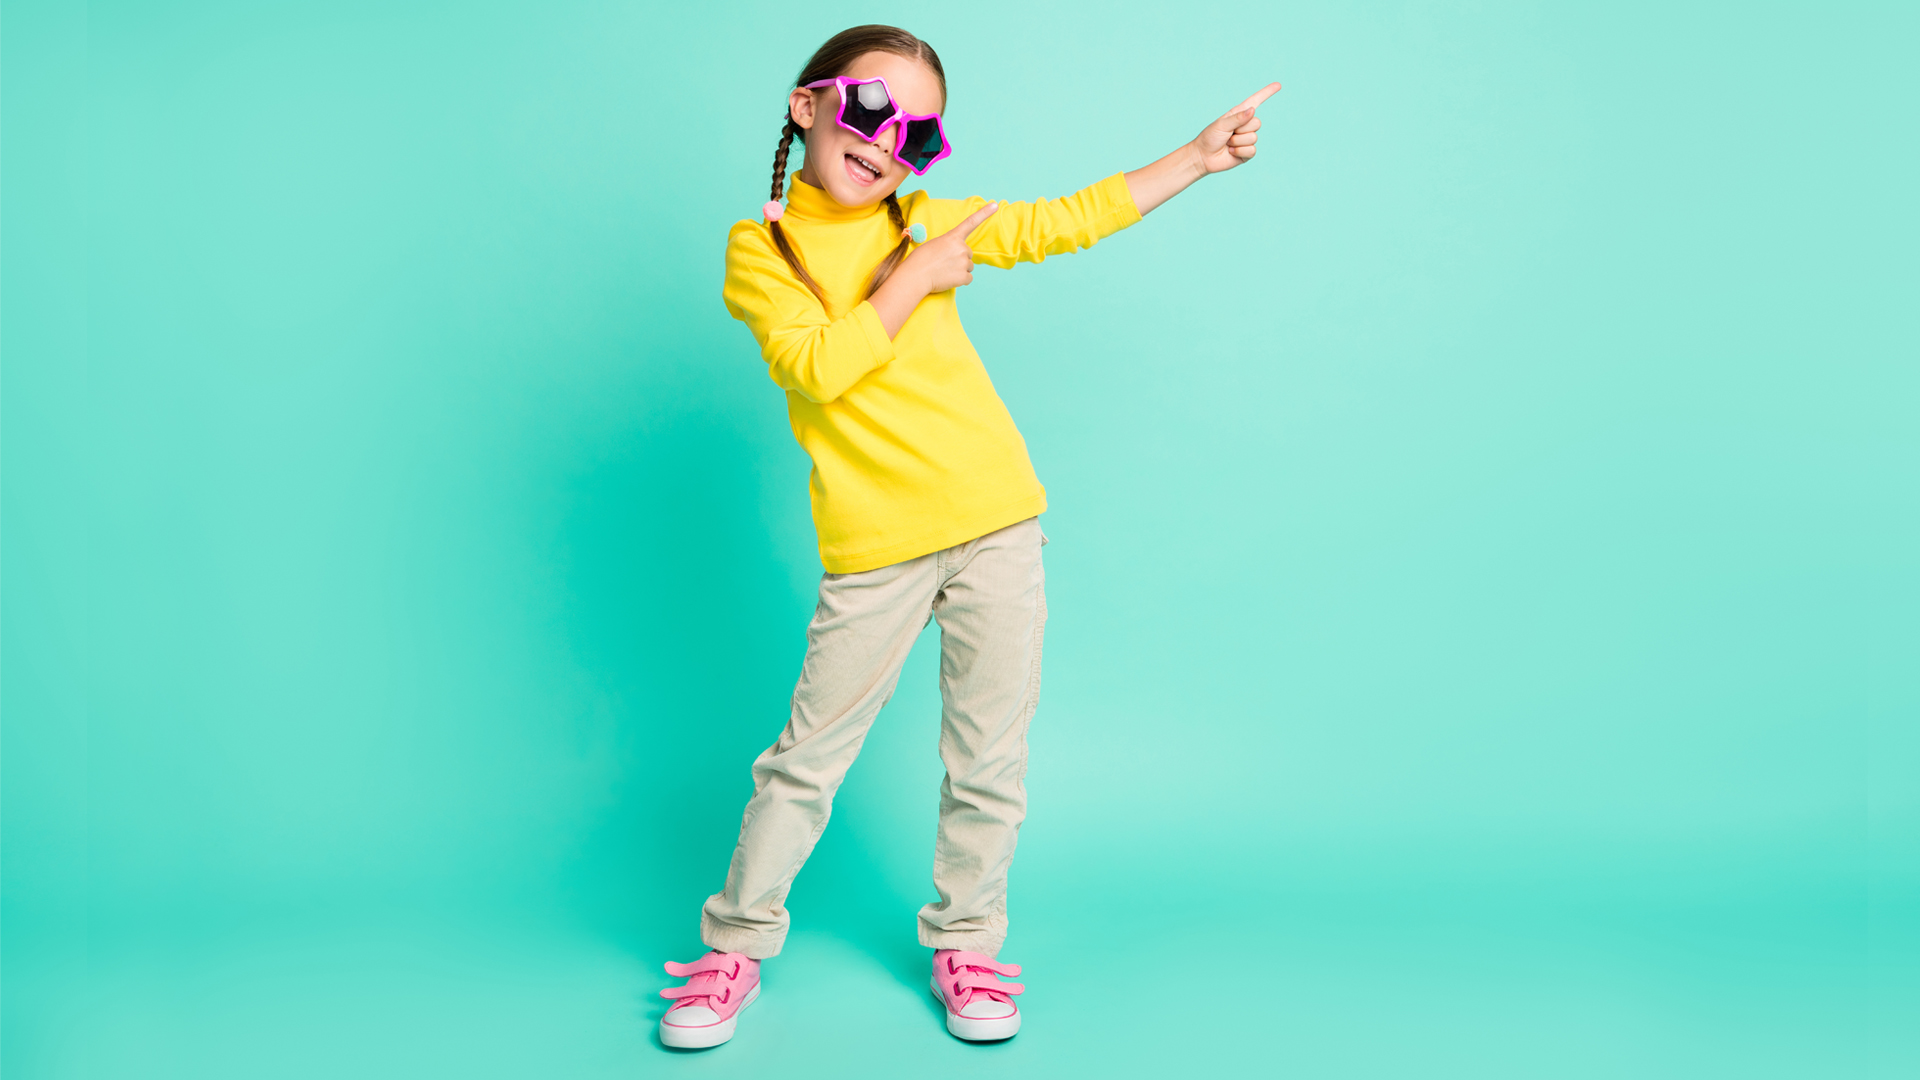 Photograph of a young girl in a bright yellow top, grey jeans and pink, star-shaped sunglasses pointing her arms and fingers to the right, against a solid, aqua background.